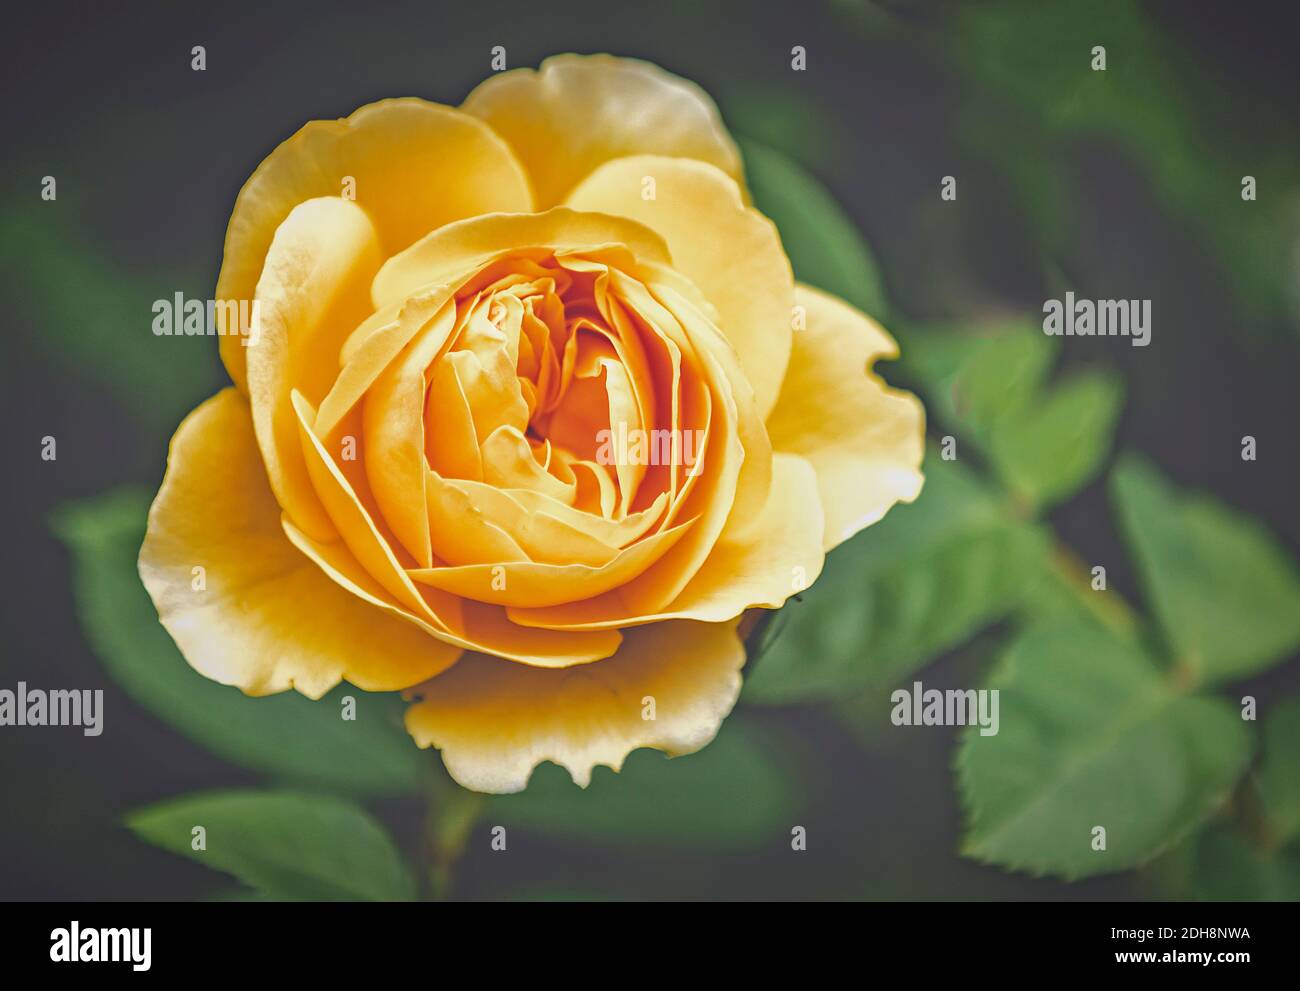 Rose, Rosa, Close-up of yellow coloured flower growing outdoor. Stock Photo